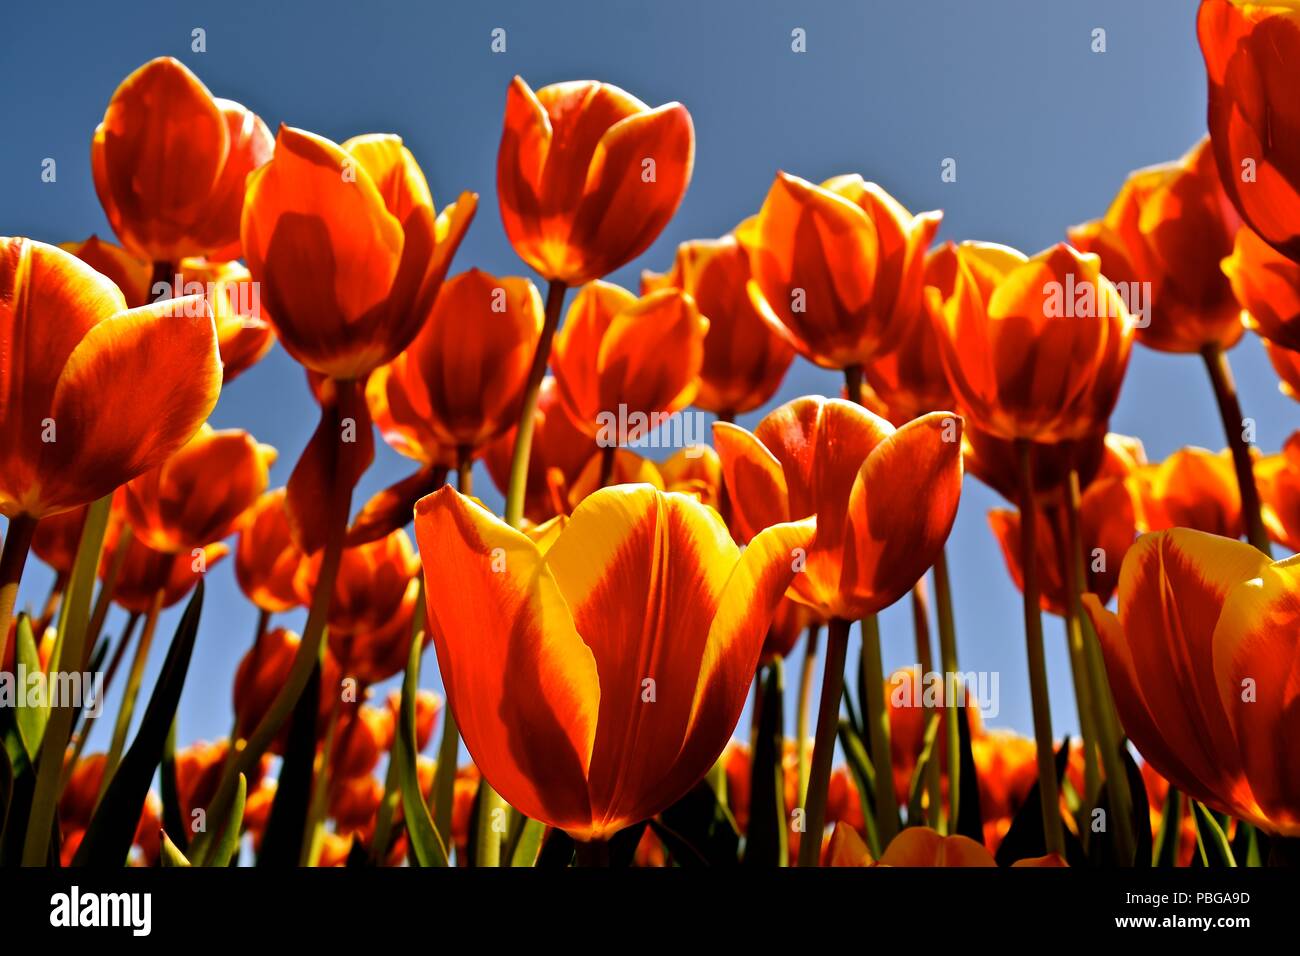 Annual celebration of Spring at the Tulip Farm in Tulip Town, Washington. These brightly colored large showy flowers originated from central Asia. Stock Photo